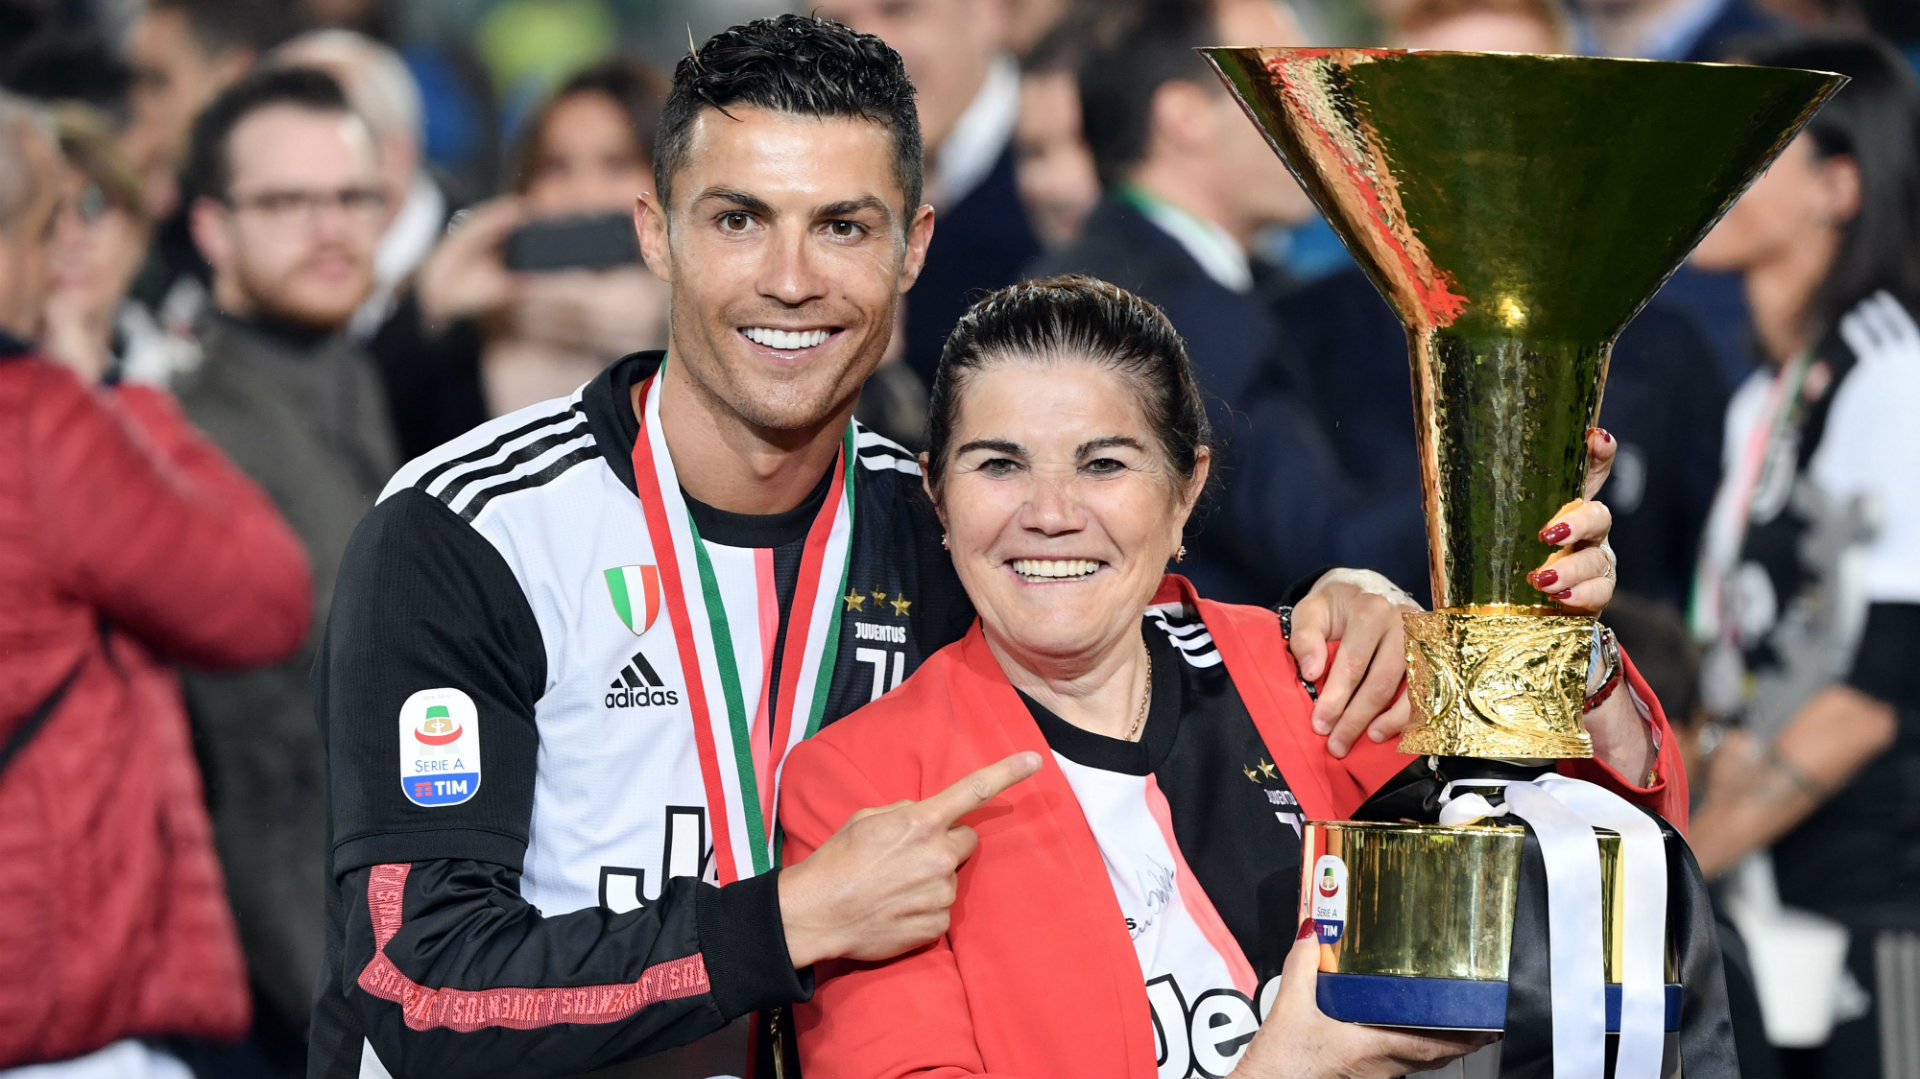 Ronaldo’s mother released from hospital after stroke & welcomes chance to celebrate ‘victory’ with Juventus star